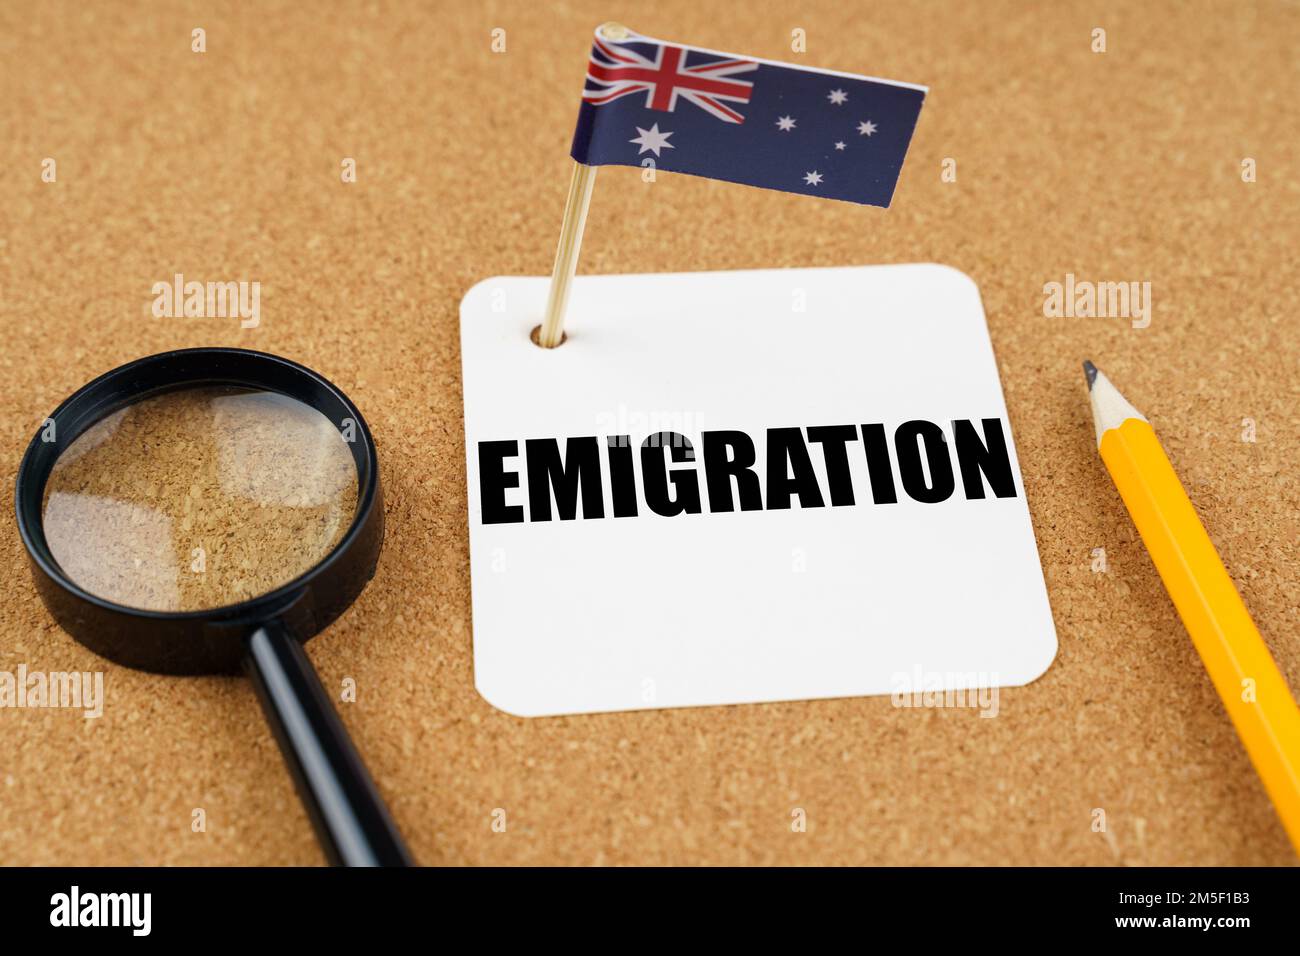 On the table is the flag of Australia, a pencil, a magnifying glass and a sheet of paper with the inscription - Emigration Stock Photo